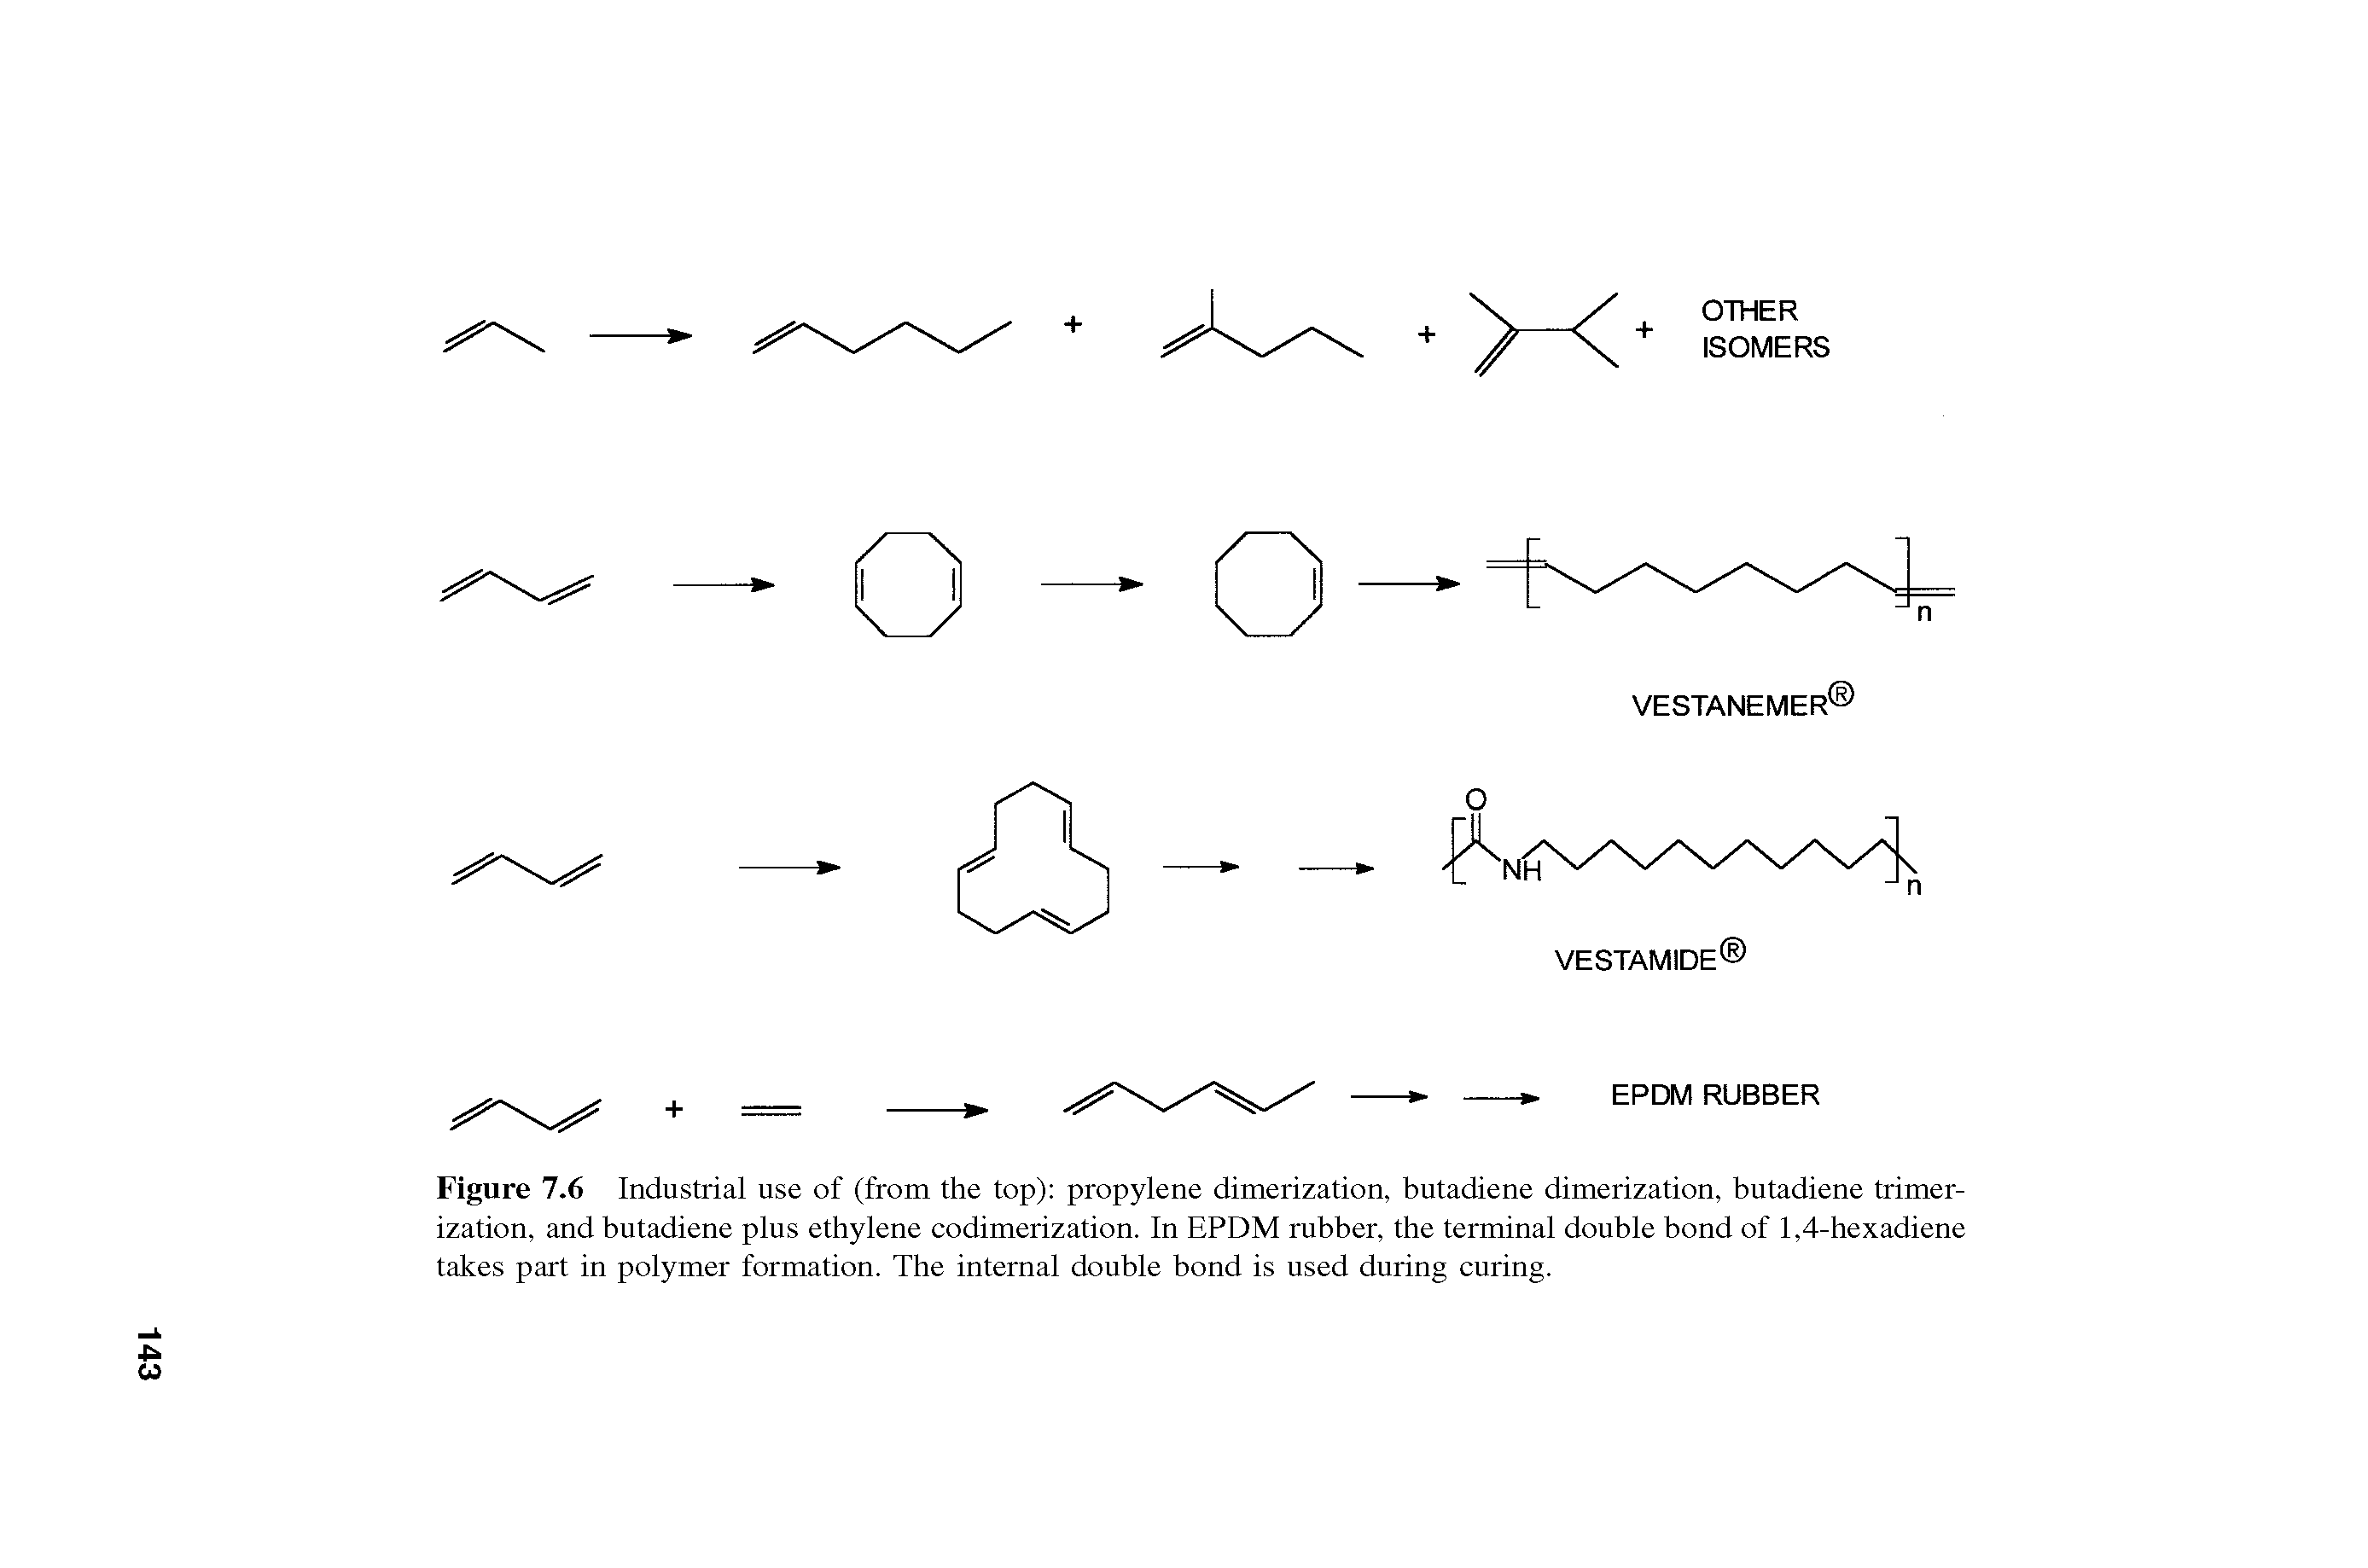 Figure 7.6 Industrial use of (from the top) propylene dimerization, butadiene dimerization, butadiene trimer-ization, and butadiene plus ethylene codimerization. In EPDM rubber, the terminal double bond of 1,4-hexadiene takes part in polymer formation. The internal double bond is used during curing.